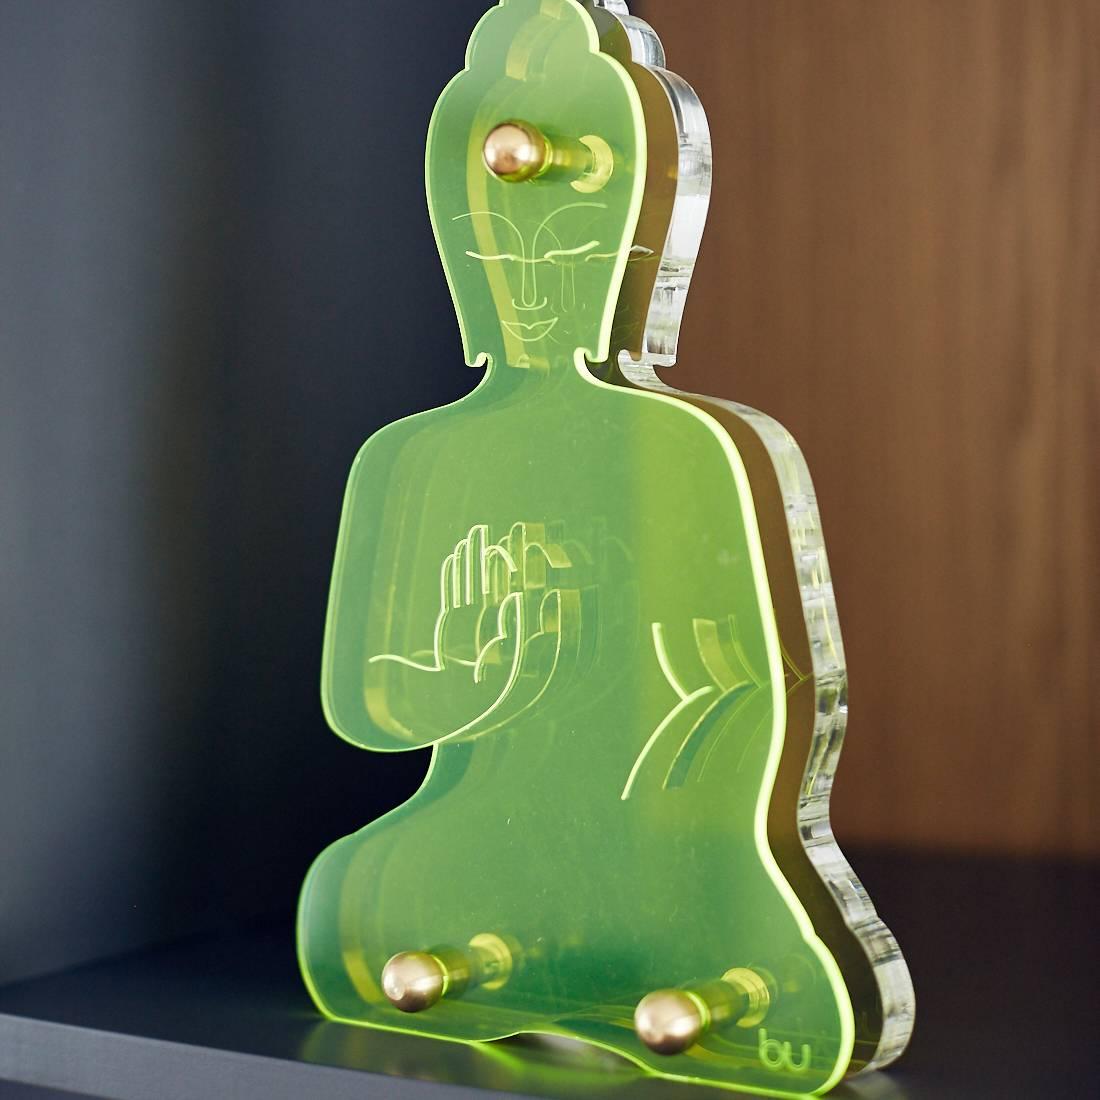 This  Green neon Buddha statue, is 2 layers of laser cut Plexiglas joined together by brass industrial elements.
A unique Buddha sculpture, designed as an everyday reminder to live a compassionate and mindful life.
Influenced by both urban